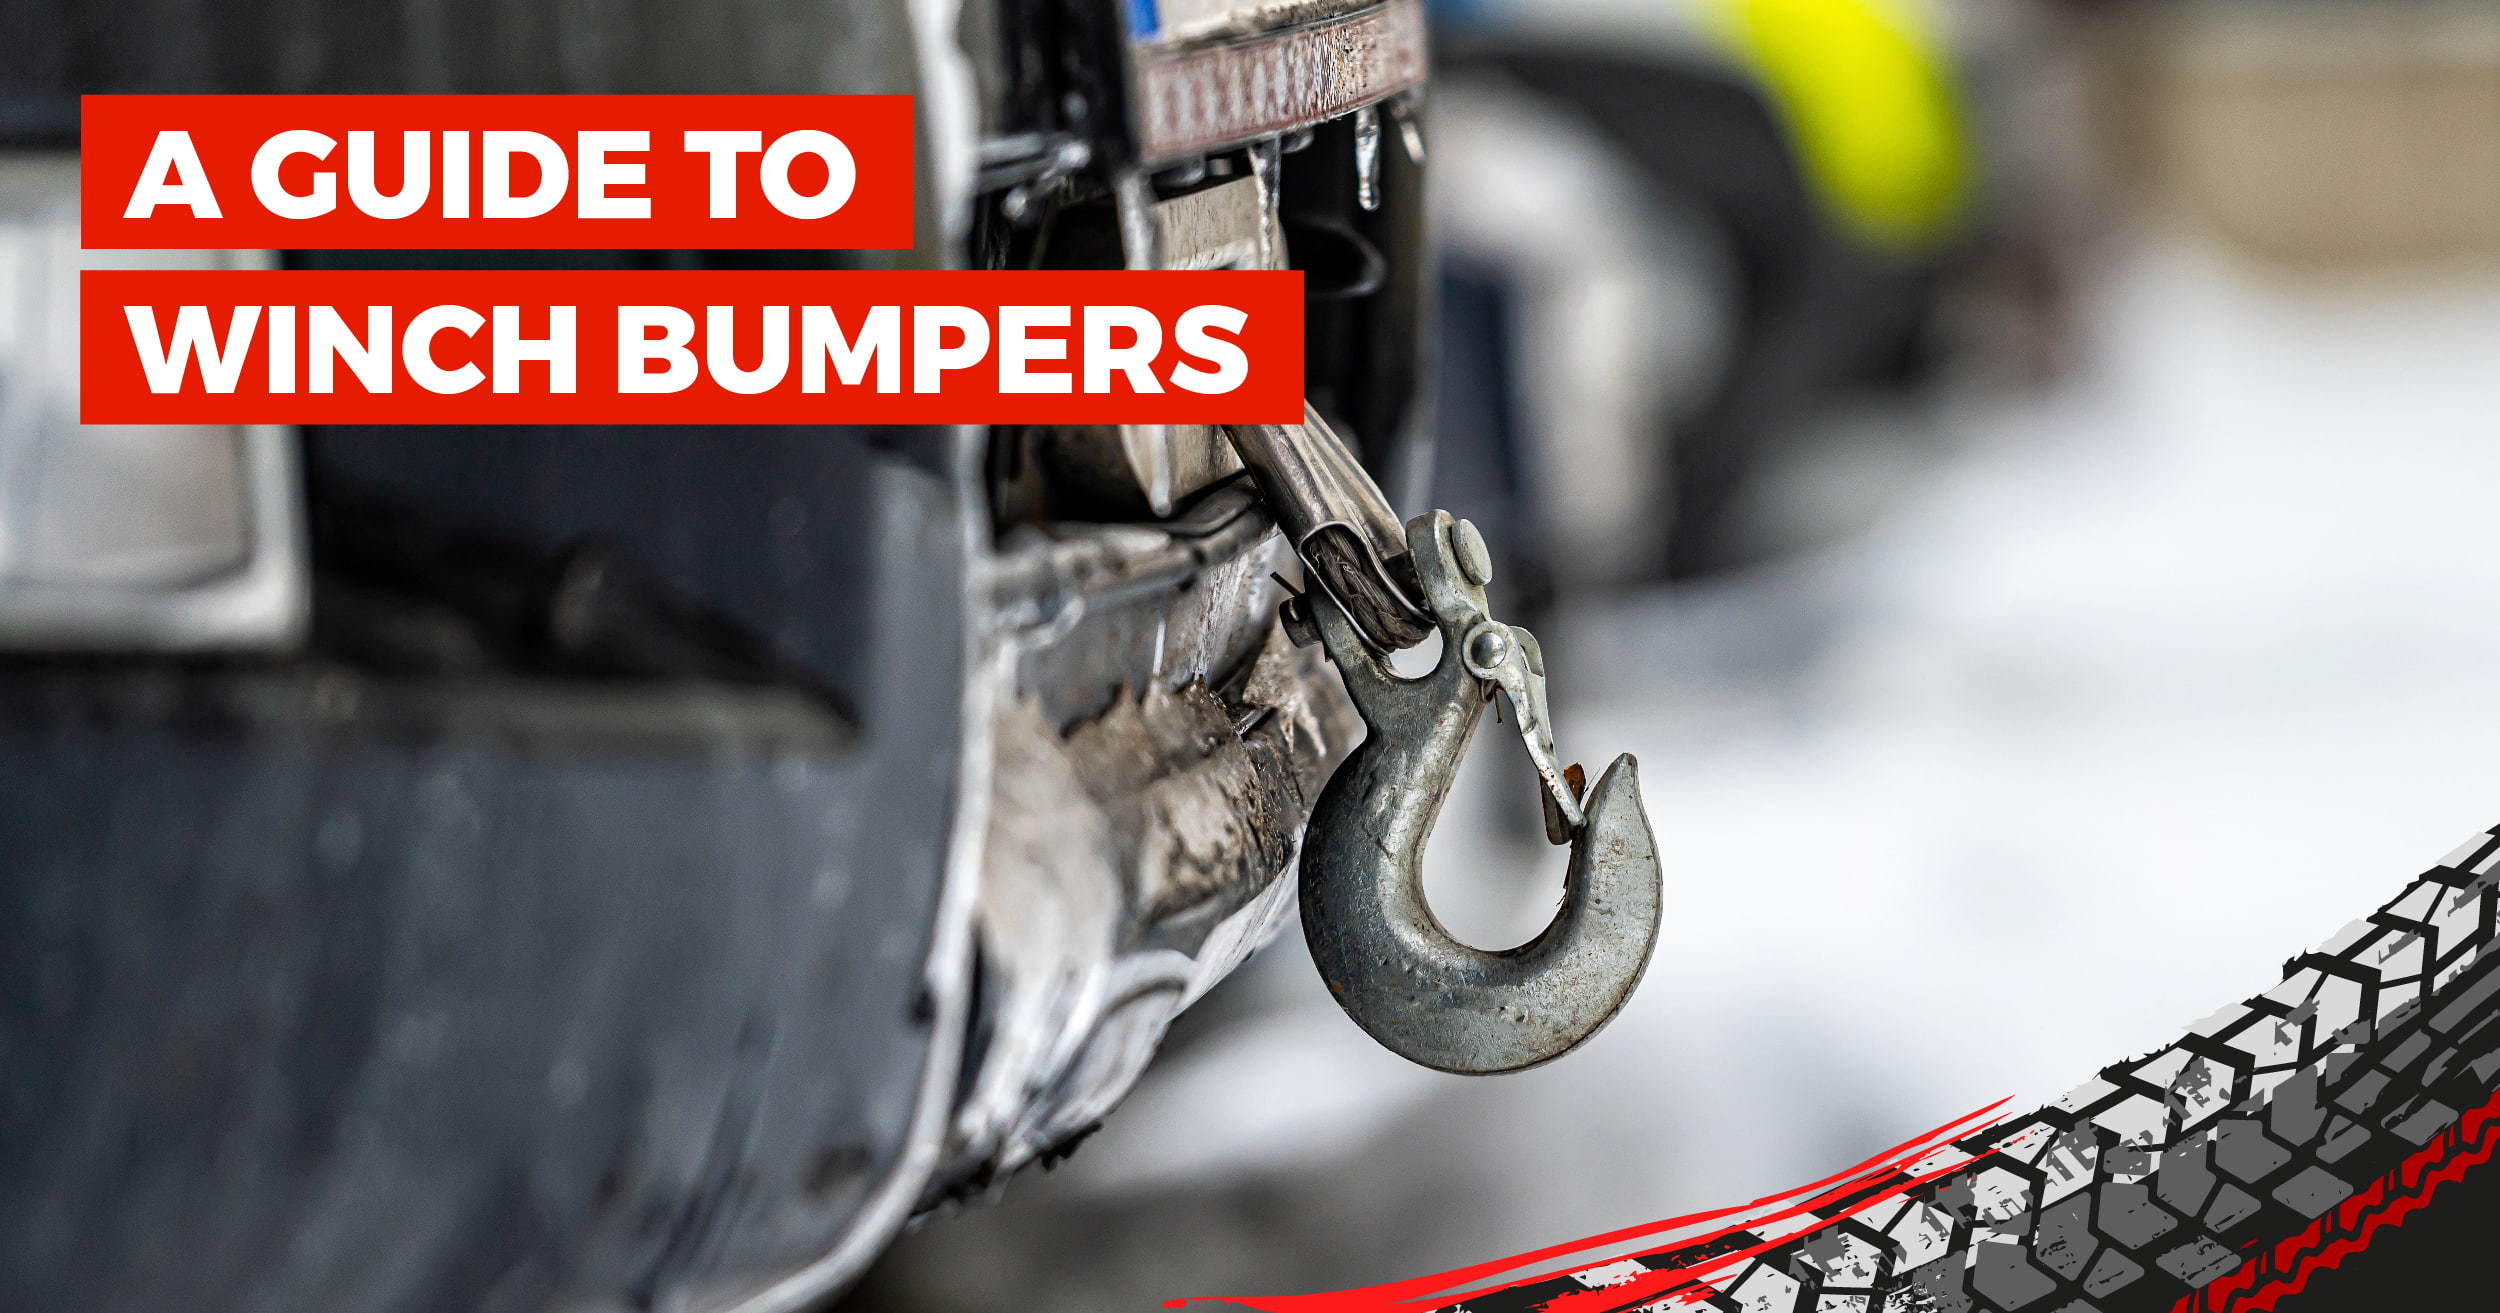 A Guide To Winch Bumpers